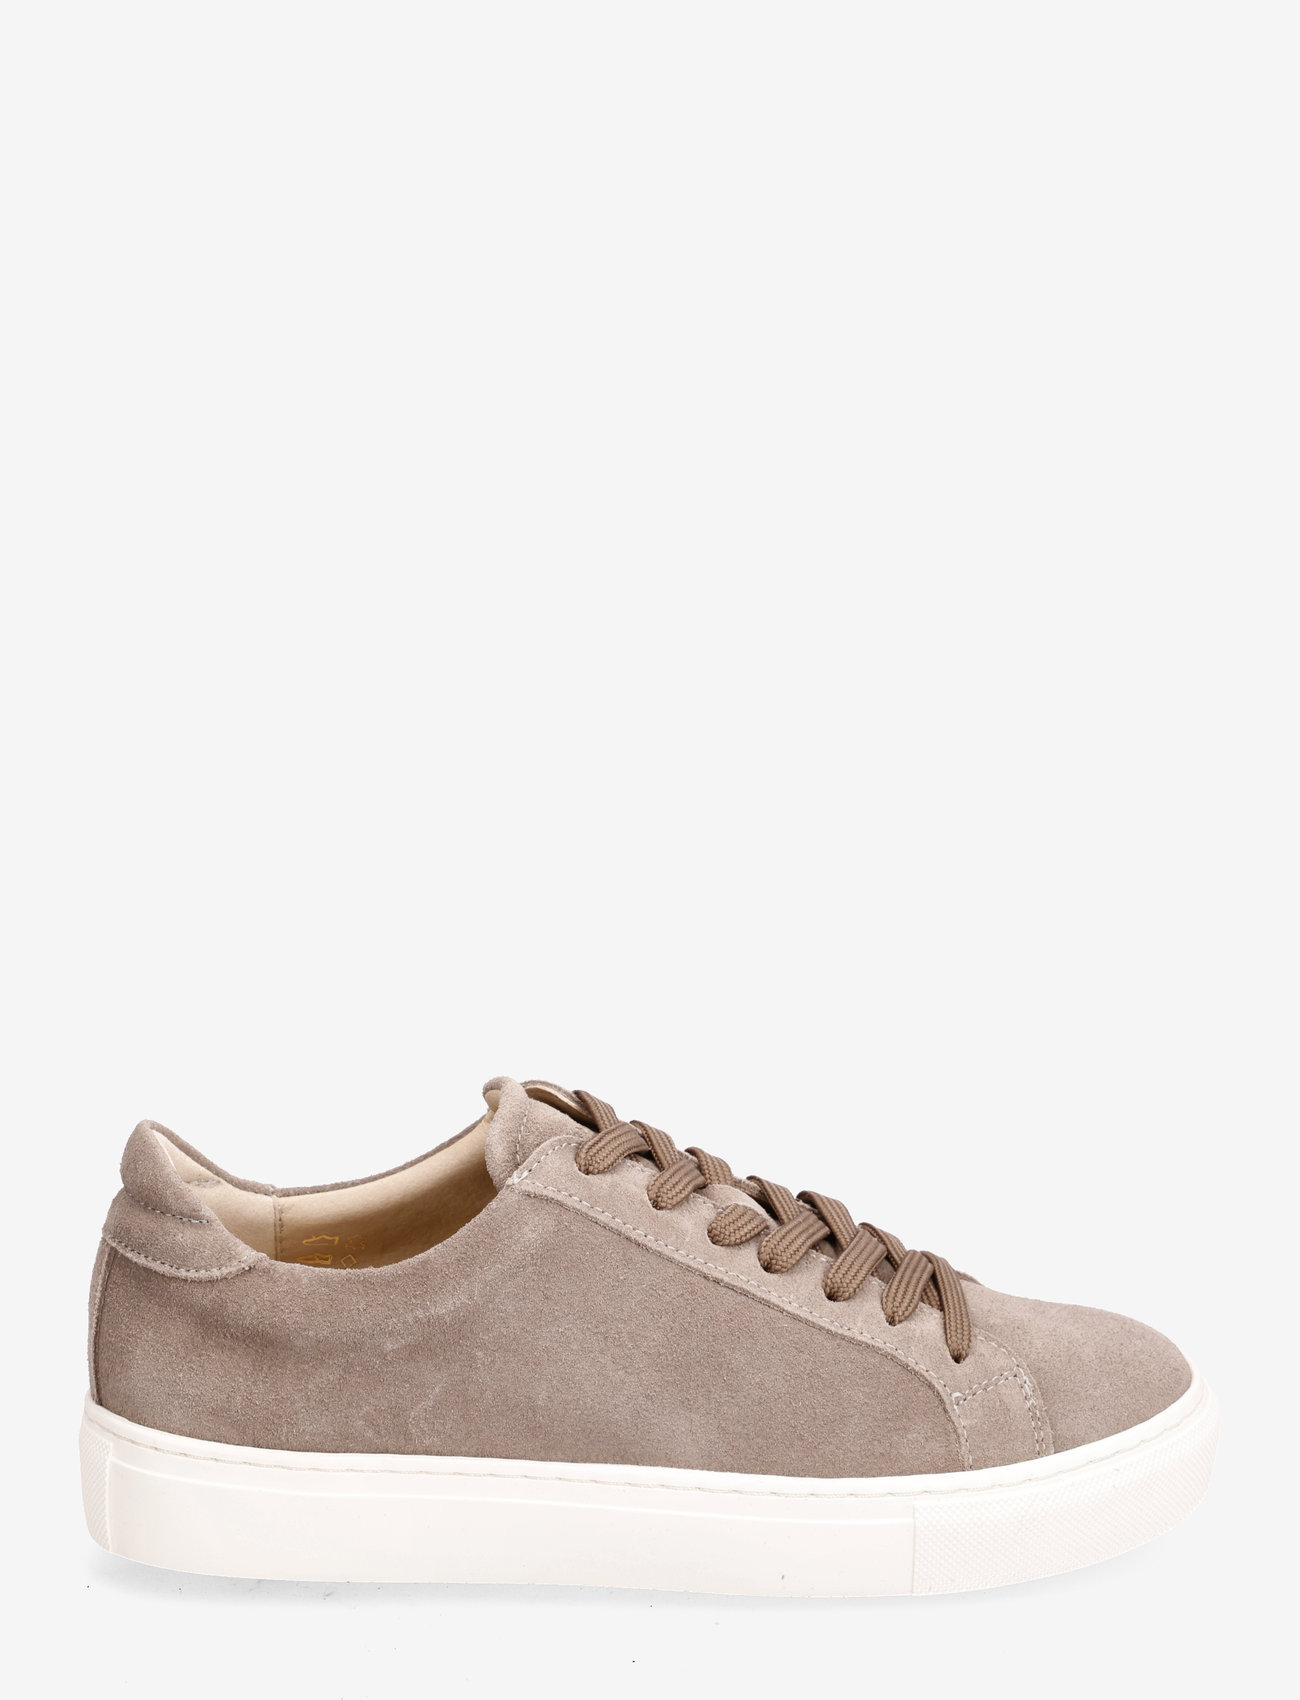 Garment Project - Type - Ardesia Suede - low top sneakers - ardesia - 1